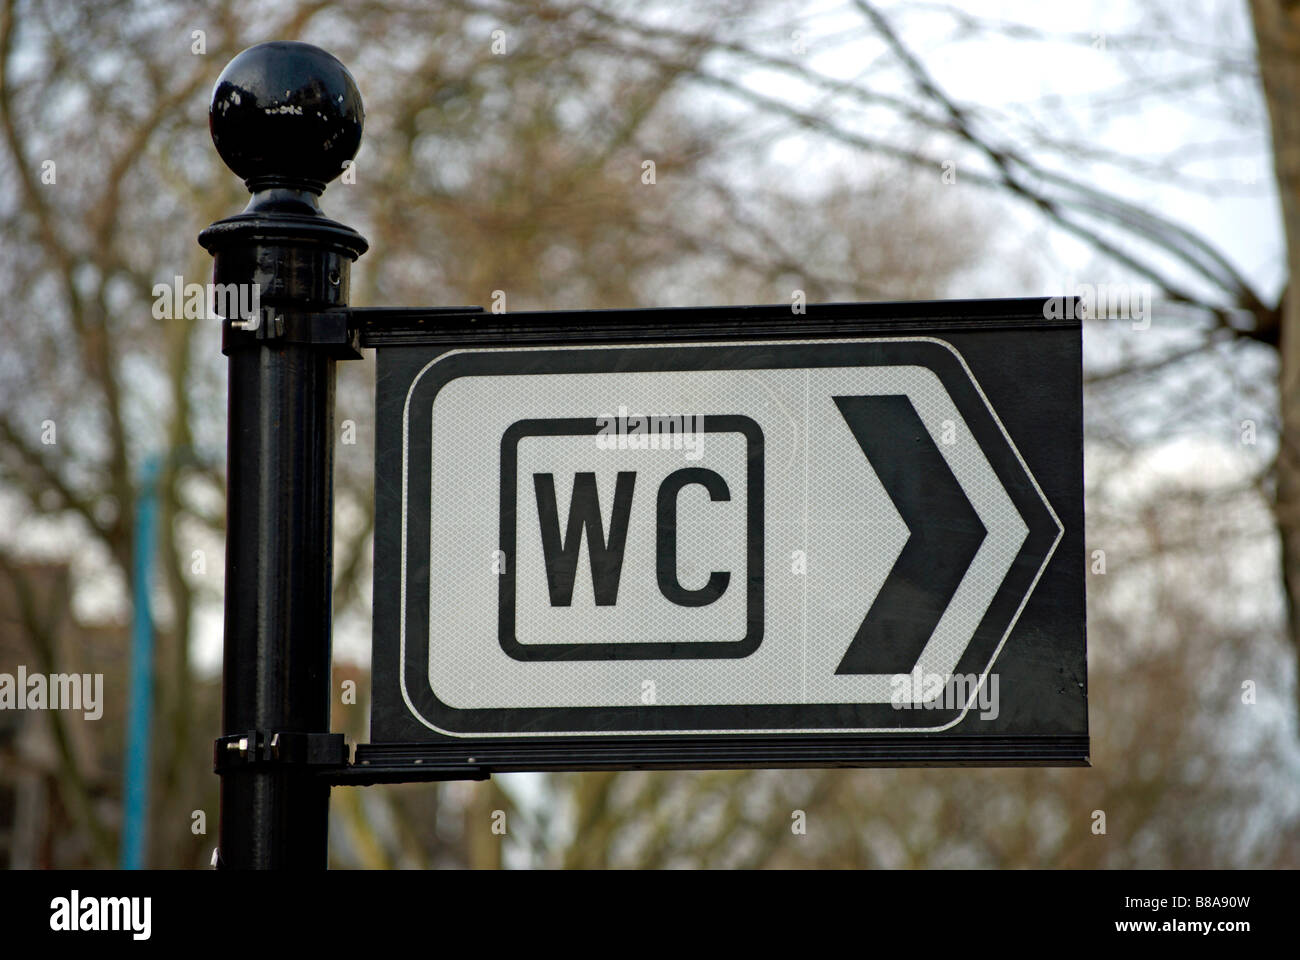 right-pointing sign for wc, or public toilet, in chiswick, west london, england Stock Photo